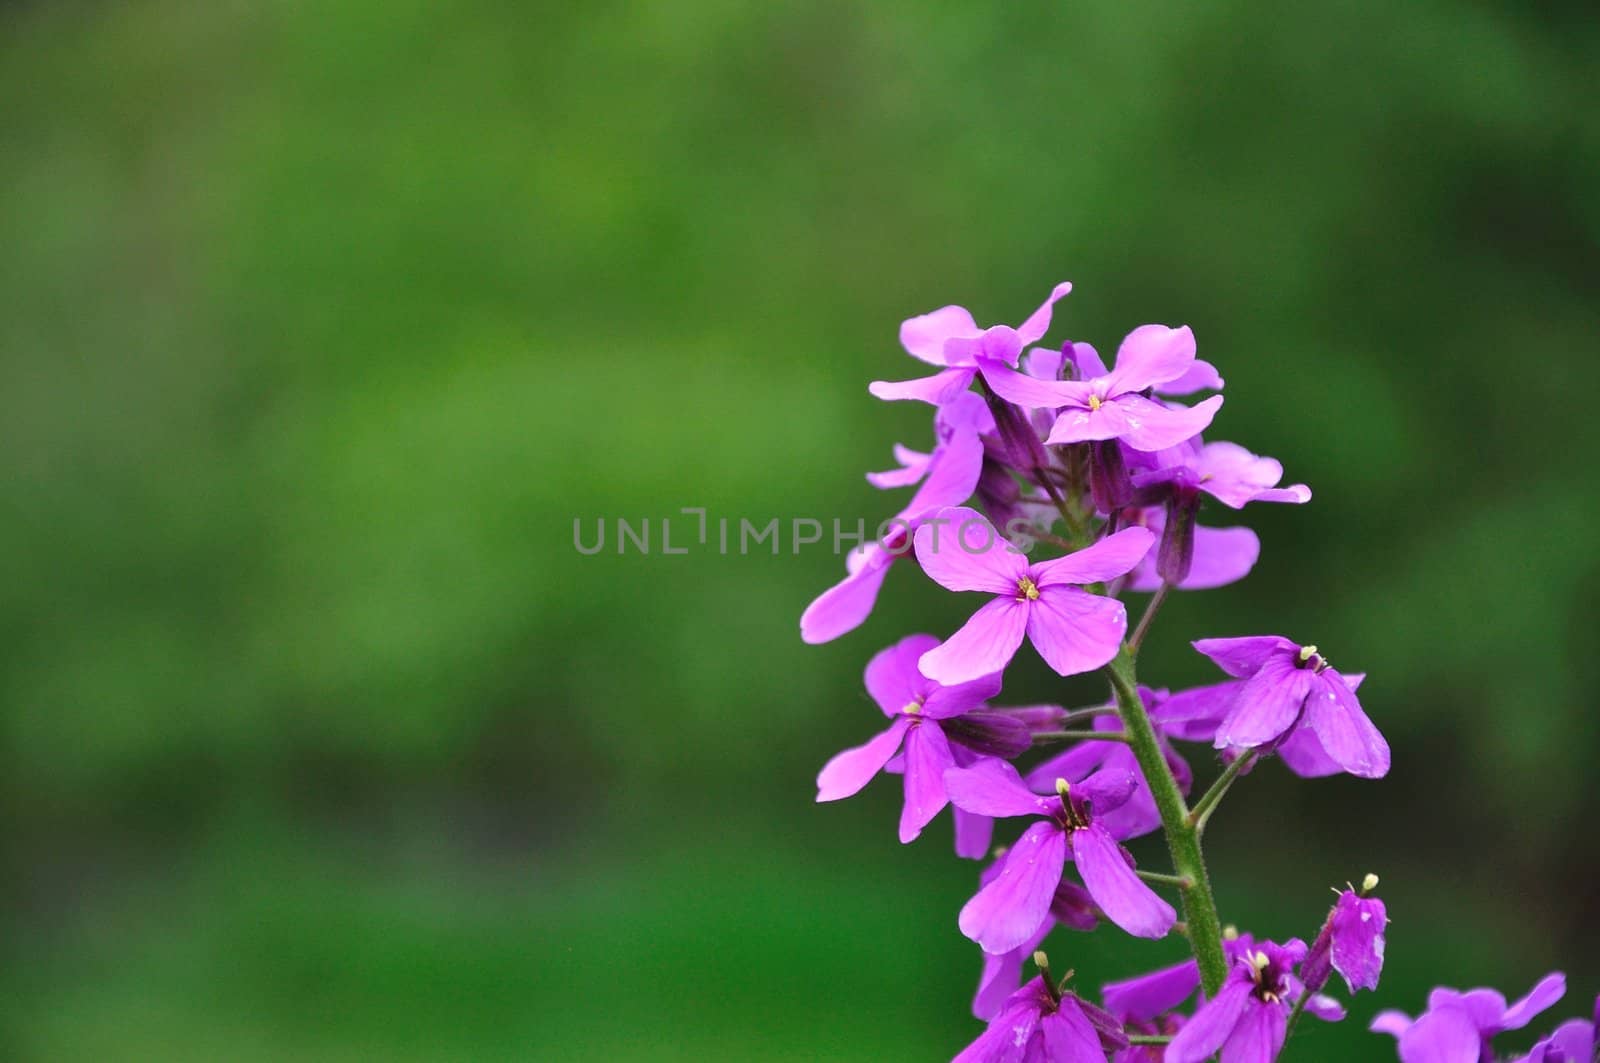 Purple Flower and Green Background by gilmourbto2001